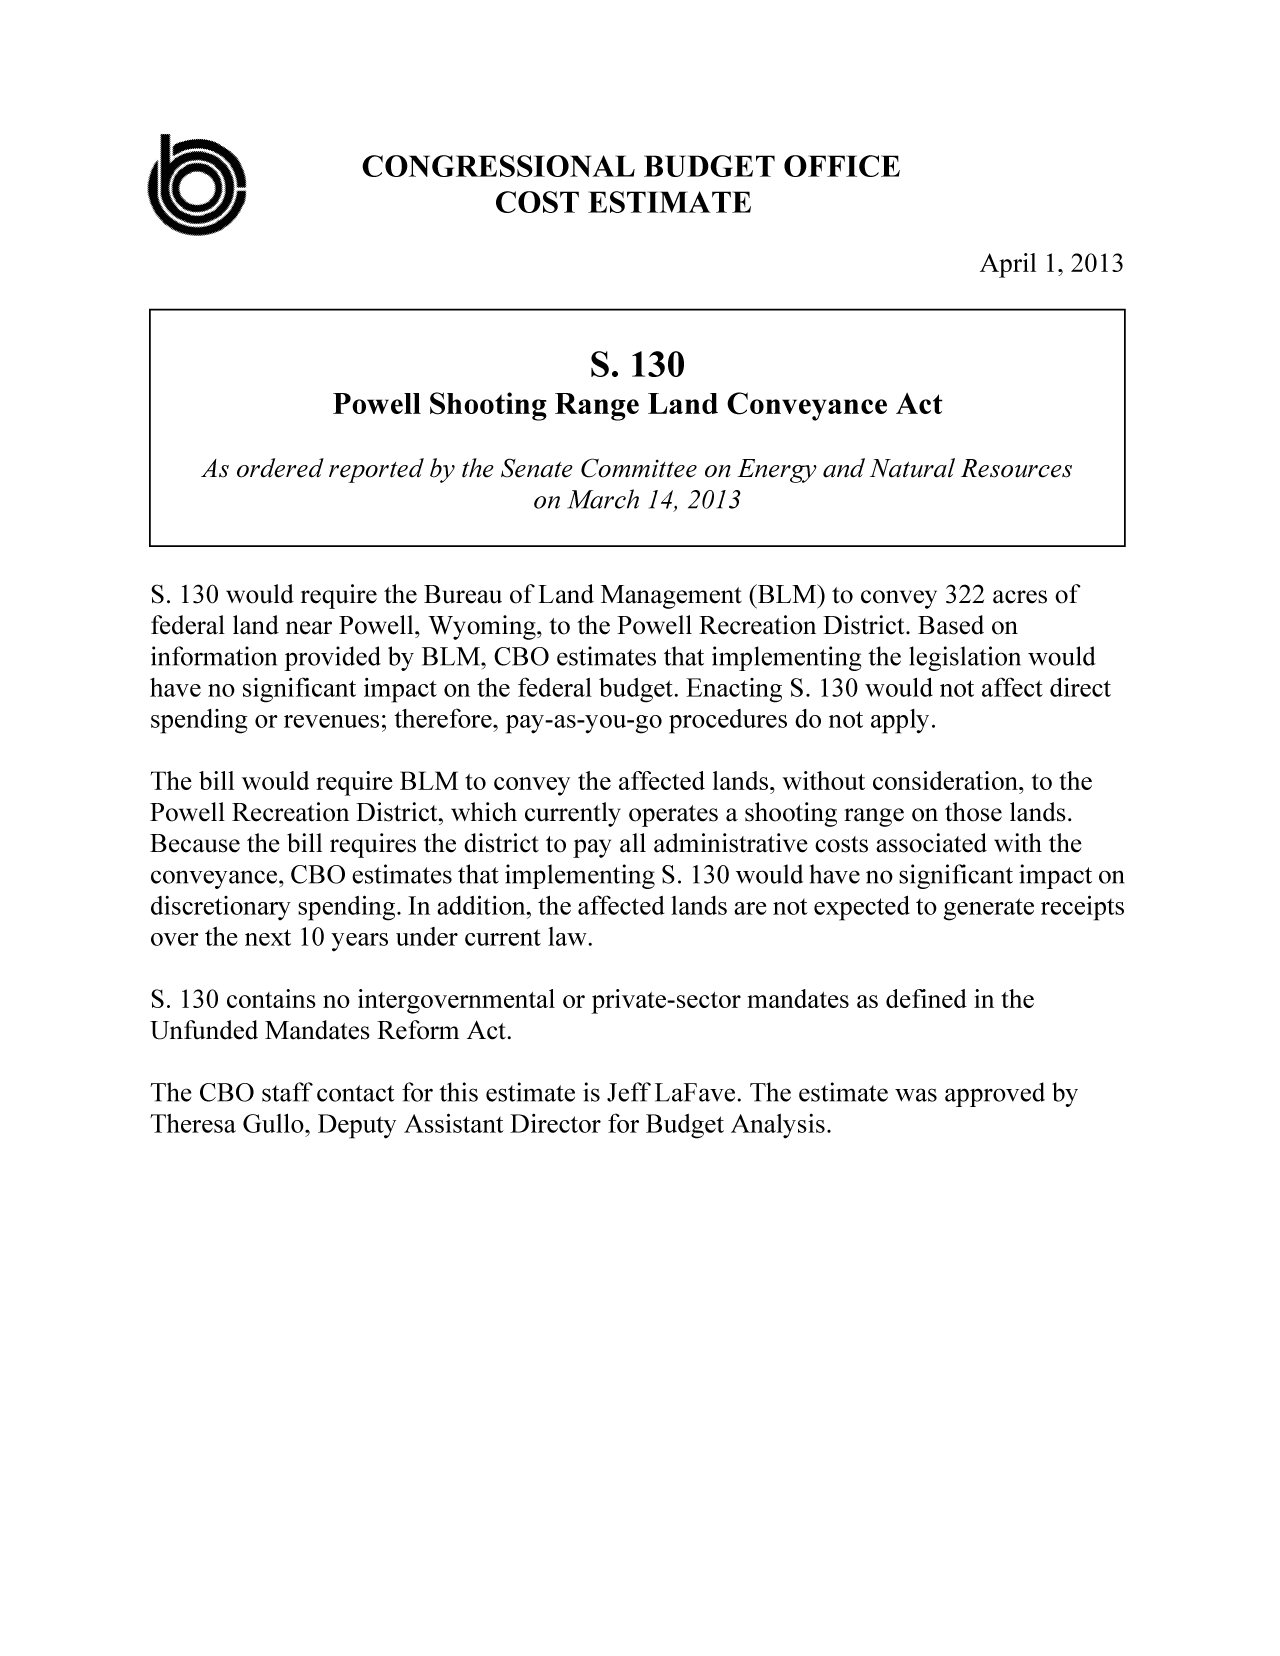 handle is hein.congrec/cbo11280 and id is 1 raw text is: CONGRESSIONAL BUDGET OFFICE
COST ESTIMATE
April 1, 2013
S. 130
Powell Shooting Range Land Conveyance Act
As ordered reported by the Senate Committee on Energy and Natural Resources
on March 14, 2013
S. 130 would require the Bureau of Land Management (BLM) to convey 322 acres of
federal land near Powell, Wyoming, to the Powell Recreation District. Based on
information provided by BLM, CBO estimates that implementing the legislation would
have no significant impact on the federal budget. Enacting S. 130 would not affect direct
spending or revenues; therefore, pay-as-you-go procedures do not apply.
The bill would require BLM to convey the affected lands, without consideration, to the
Powell Recreation District, which currently operates a shooting range on those lands.
Because the bill requires the district to pay all administrative costs associated with the
conveyance, CBO estimates that implementing S. 130 would have no significant impact on
discretionary spending. In addition, the affected lands are not expected to generate receipts
over the next 10 years under current law.
S. 130 contains no intergovernmental or private-sector mandates as defined in the
Unfunded Mandates Reform Act.
The CBO staff contact for this estimate is Jeff LaFave. The estimate was approved by
Theresa Gullo, Deputy Assistant Director for Budget Analysis.


